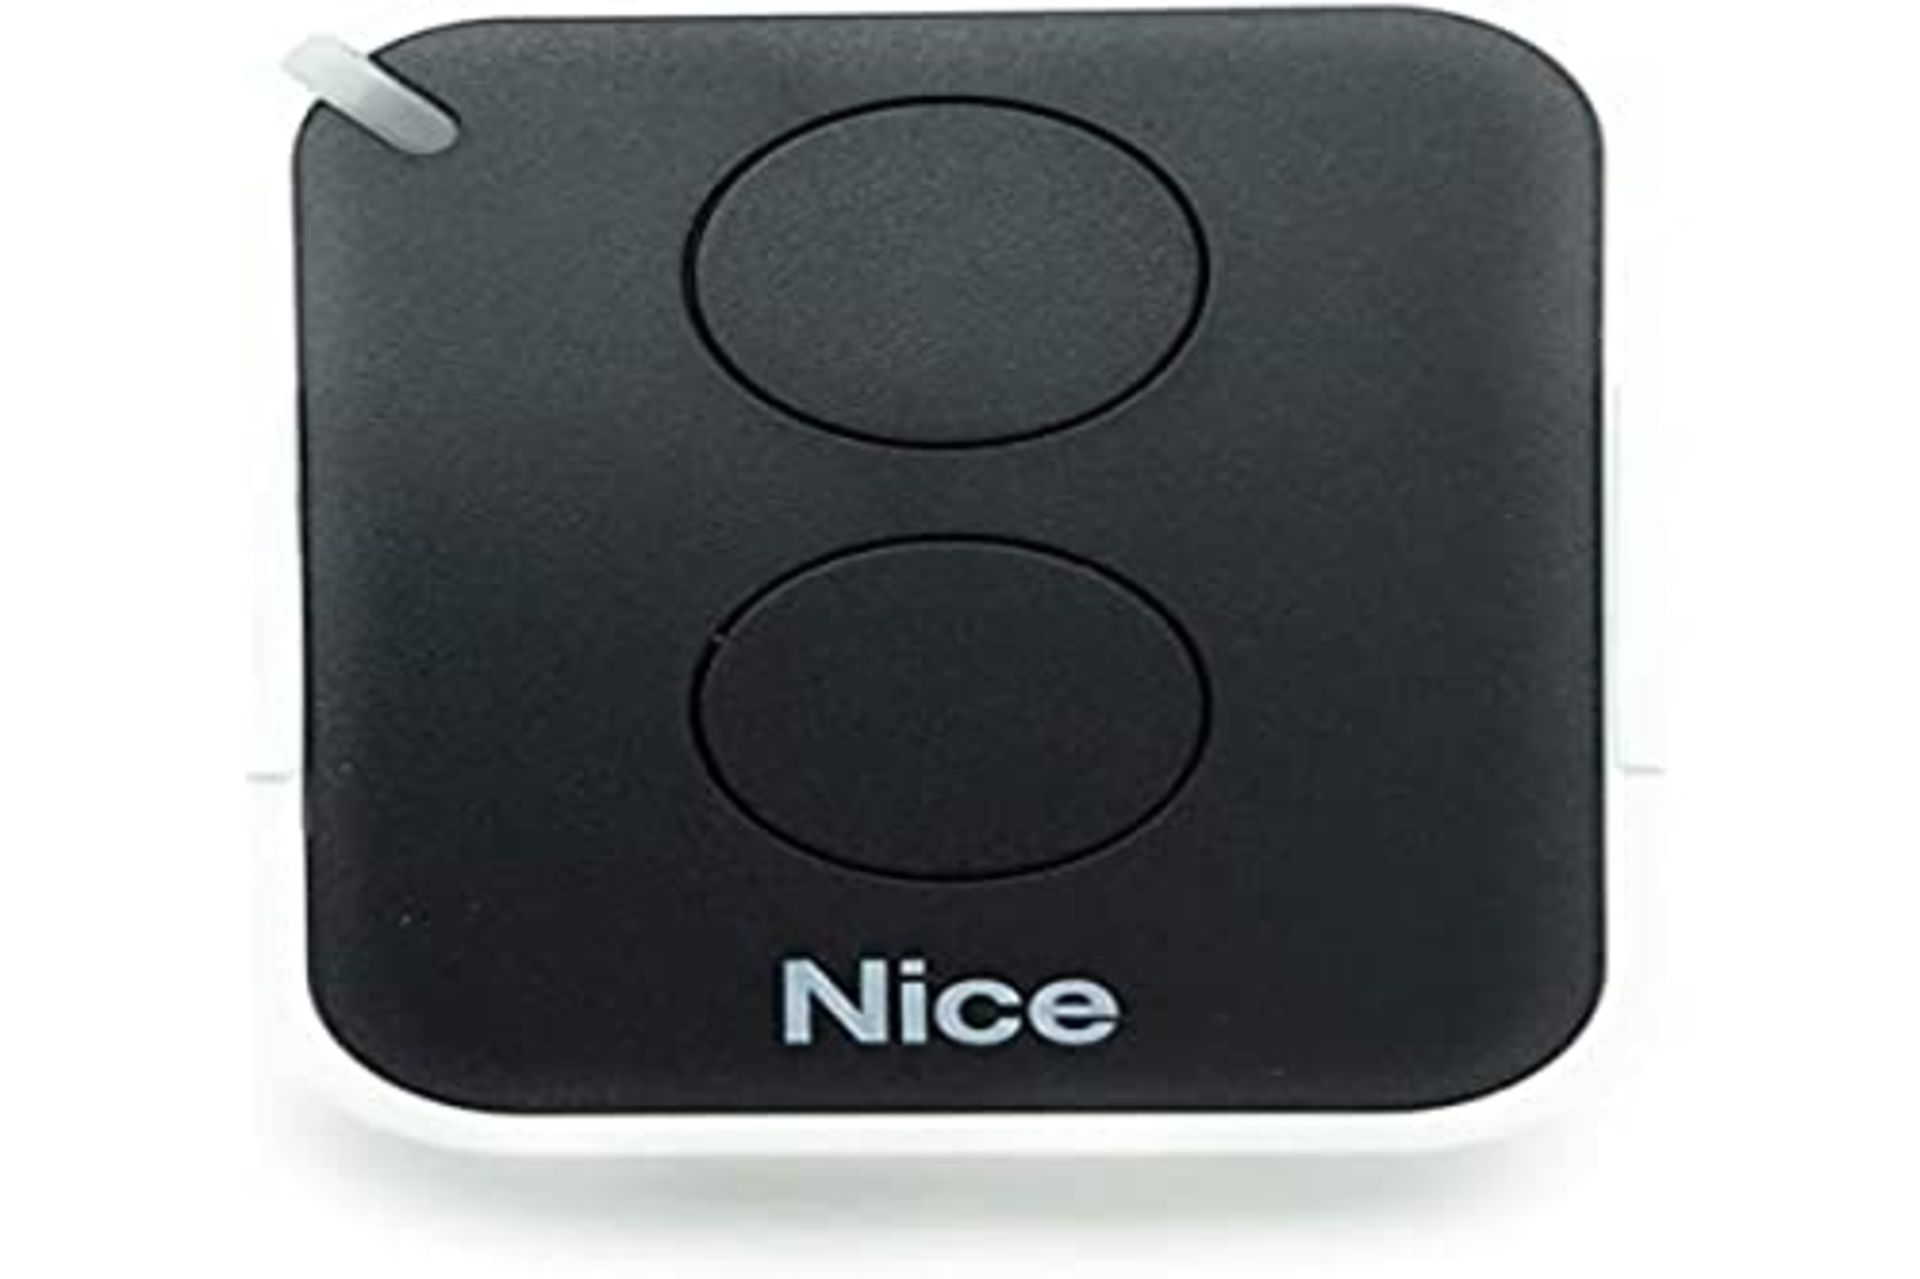 NICE - Nice Era ONE2 remote control, 2 channels, 433.92 MHz, Black/White, ON2